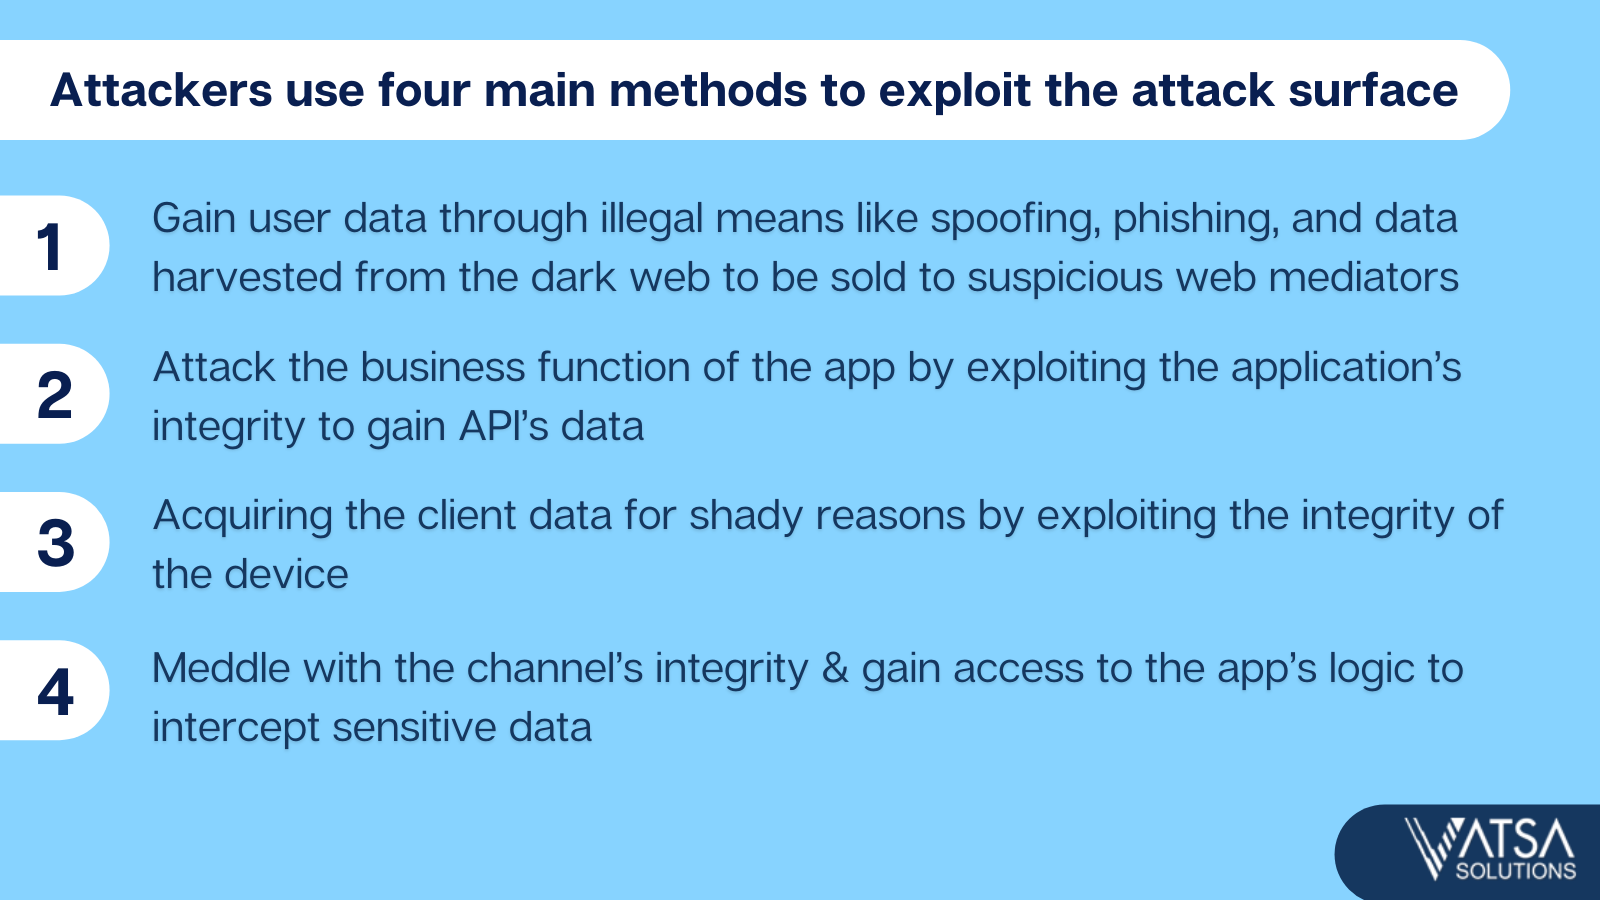 4 Methods attackers Use to Exploit the Mobile Attack Surface